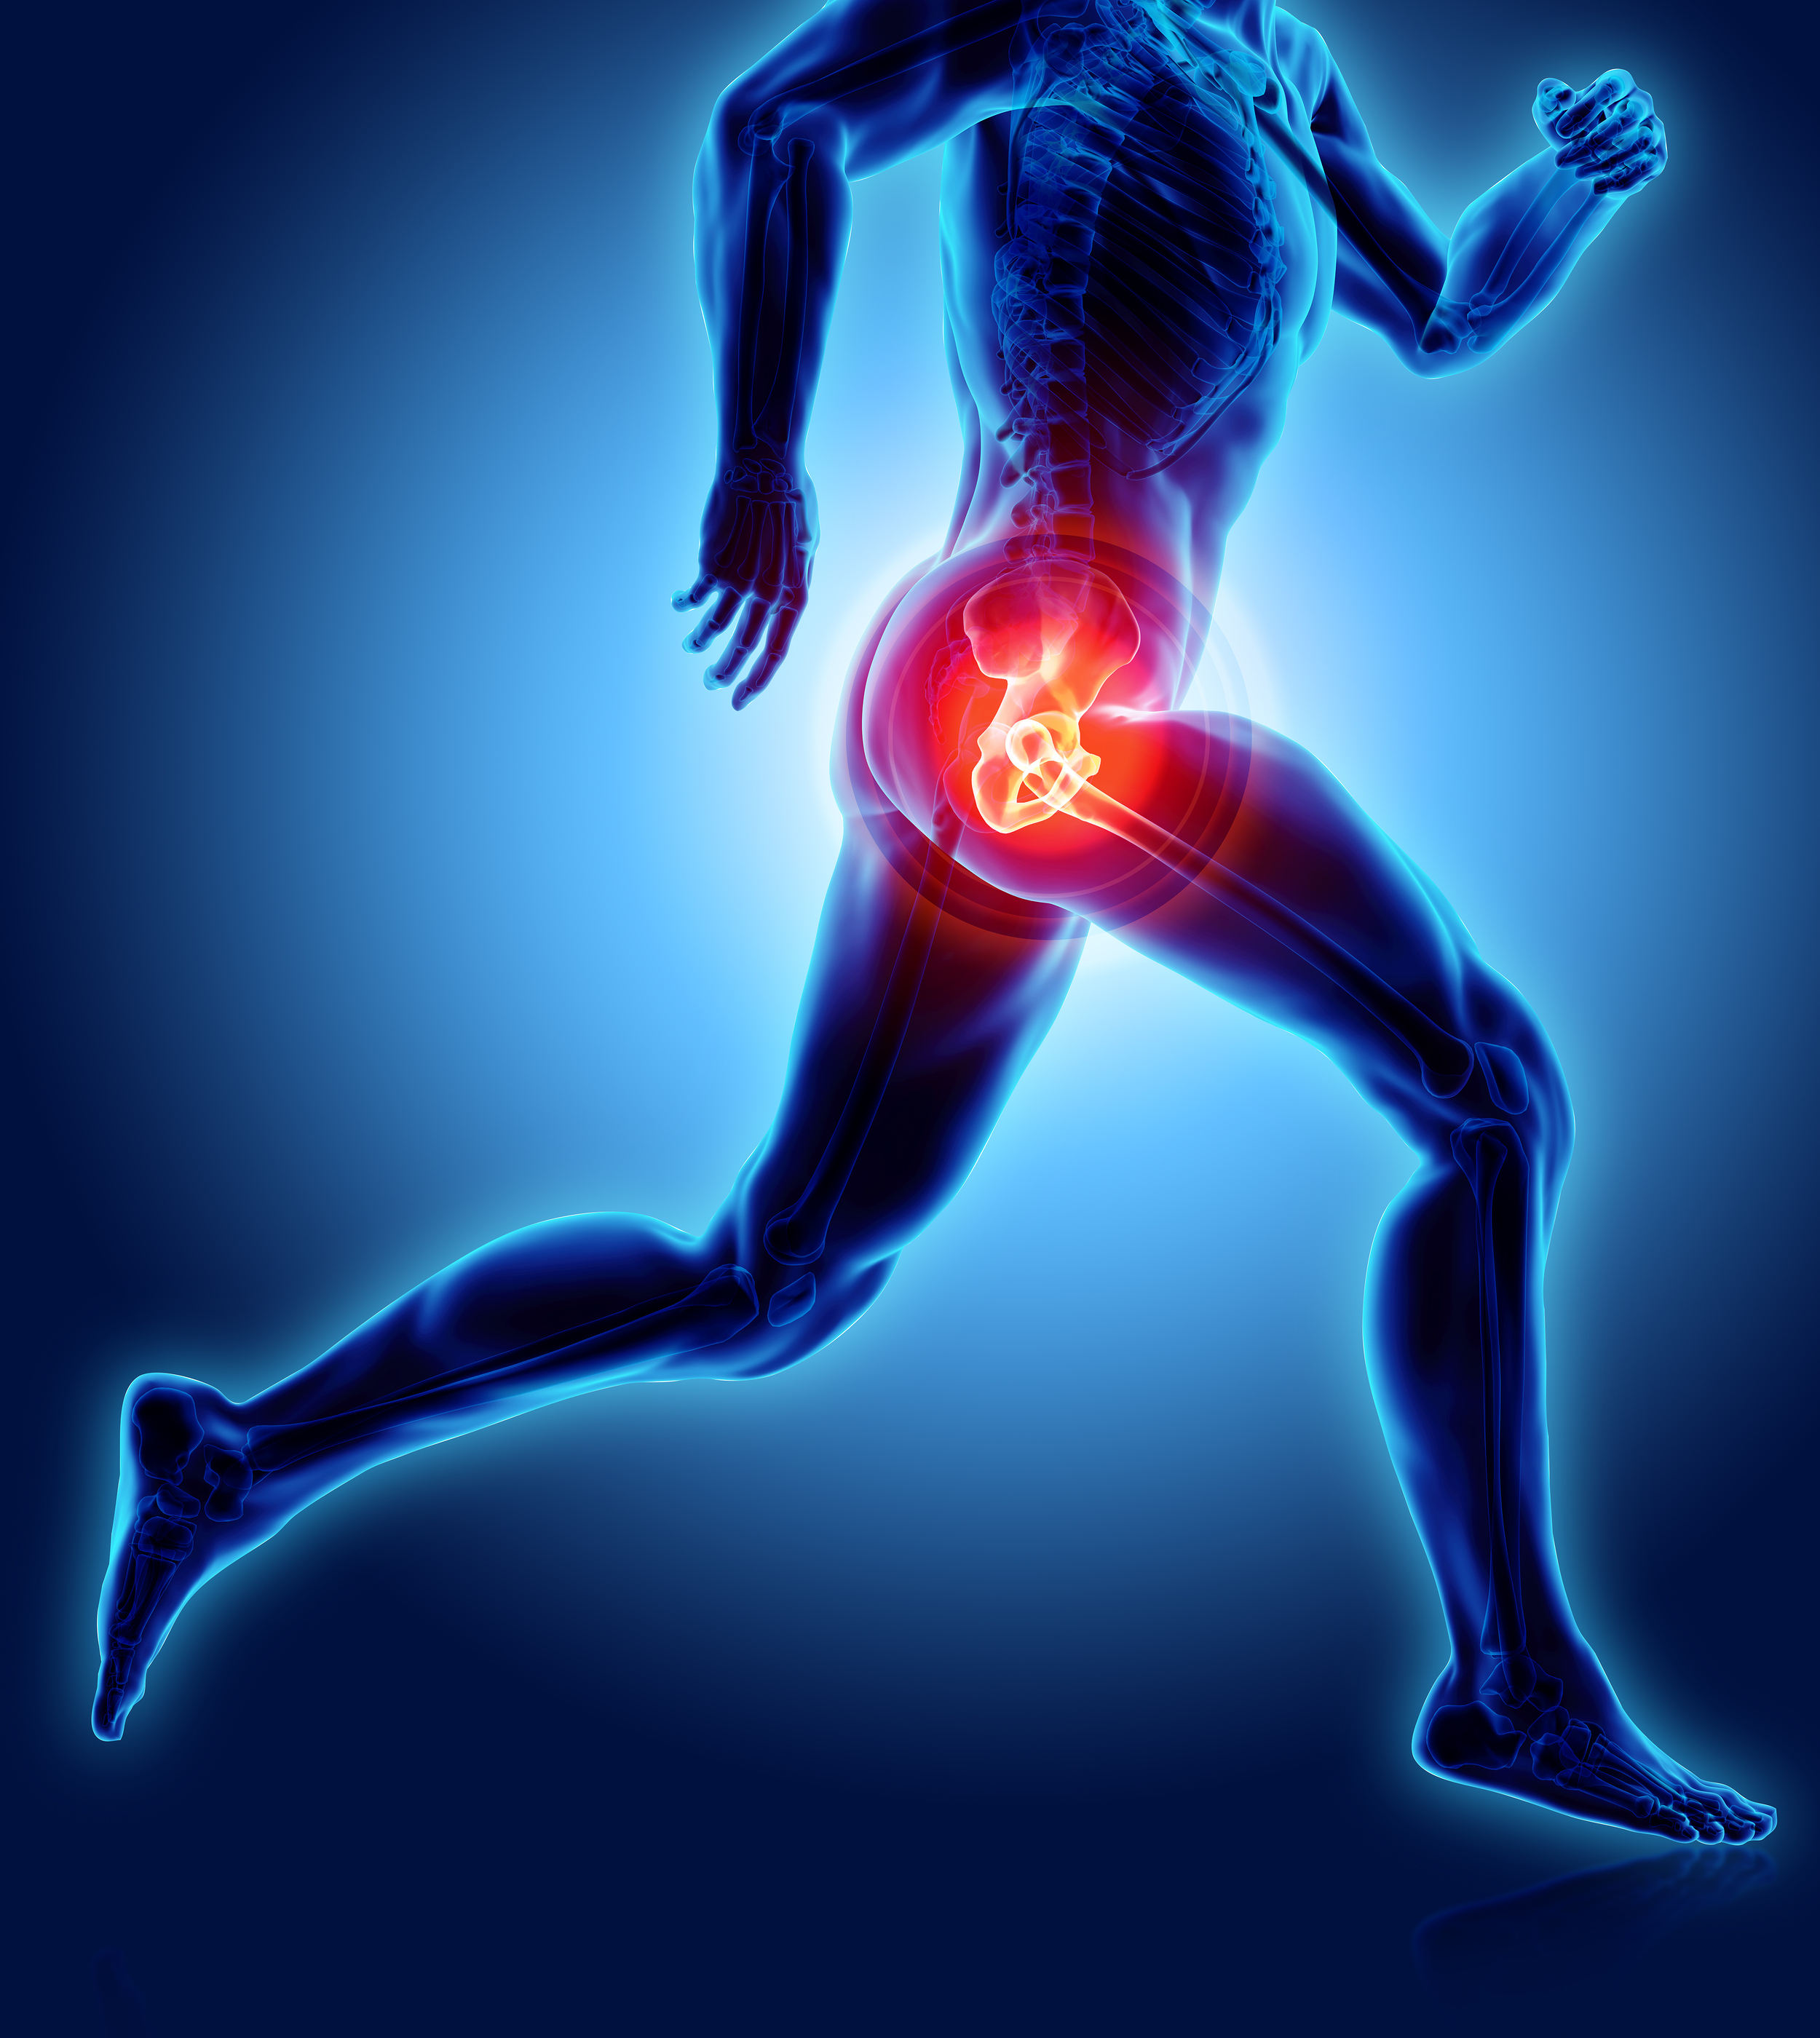 Treatment Options for Hip and Thigh Injuries